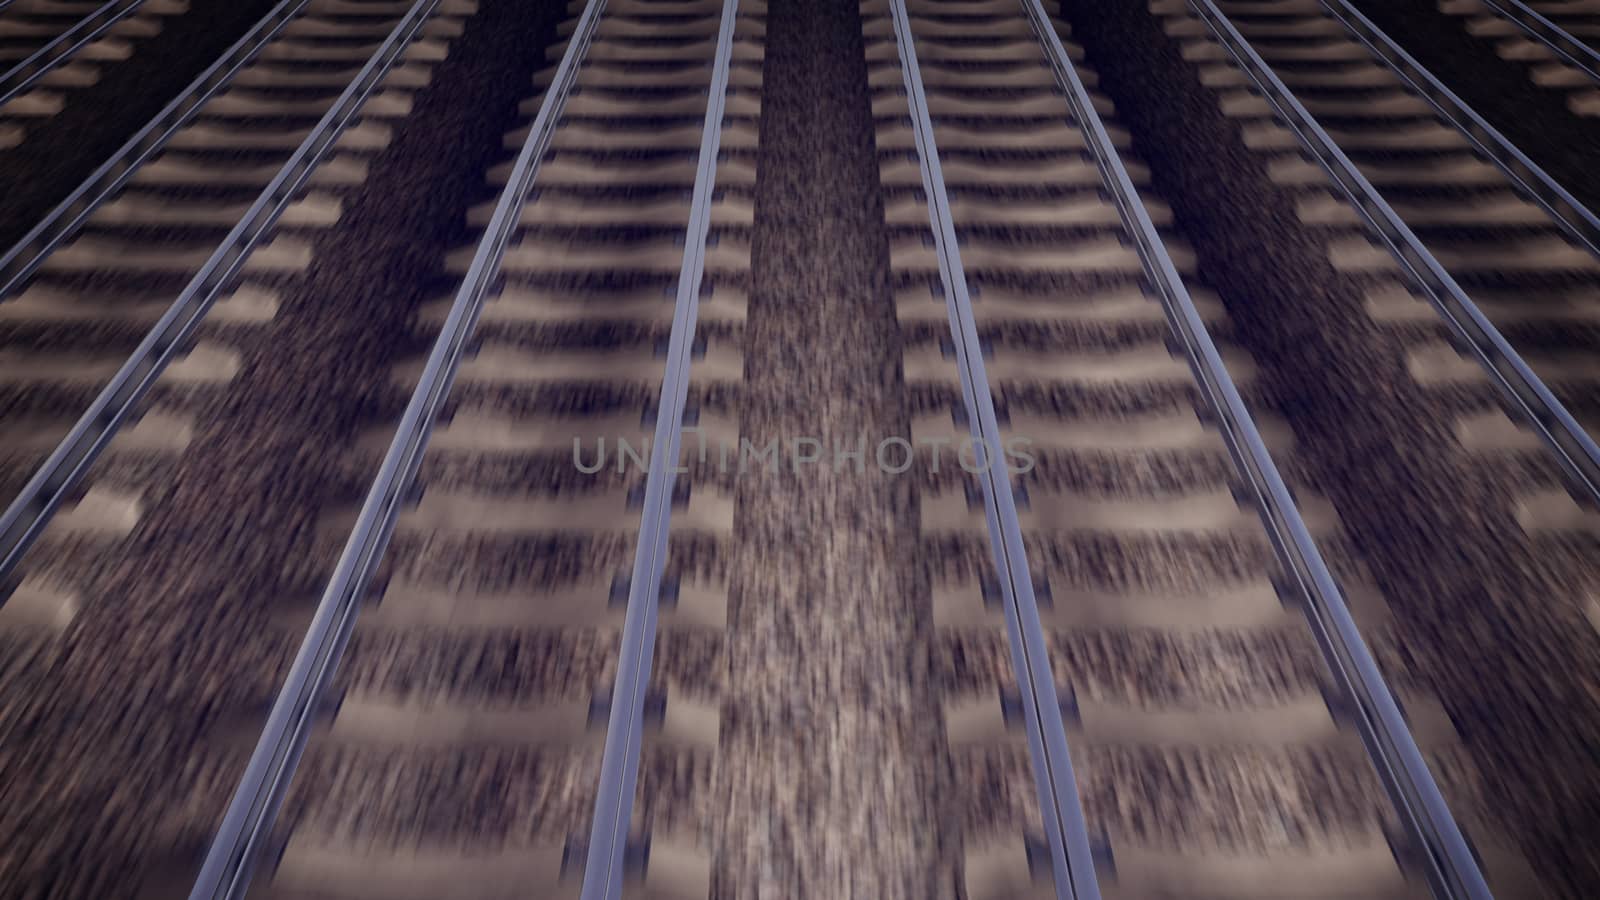 The railways for a train in motion blur.